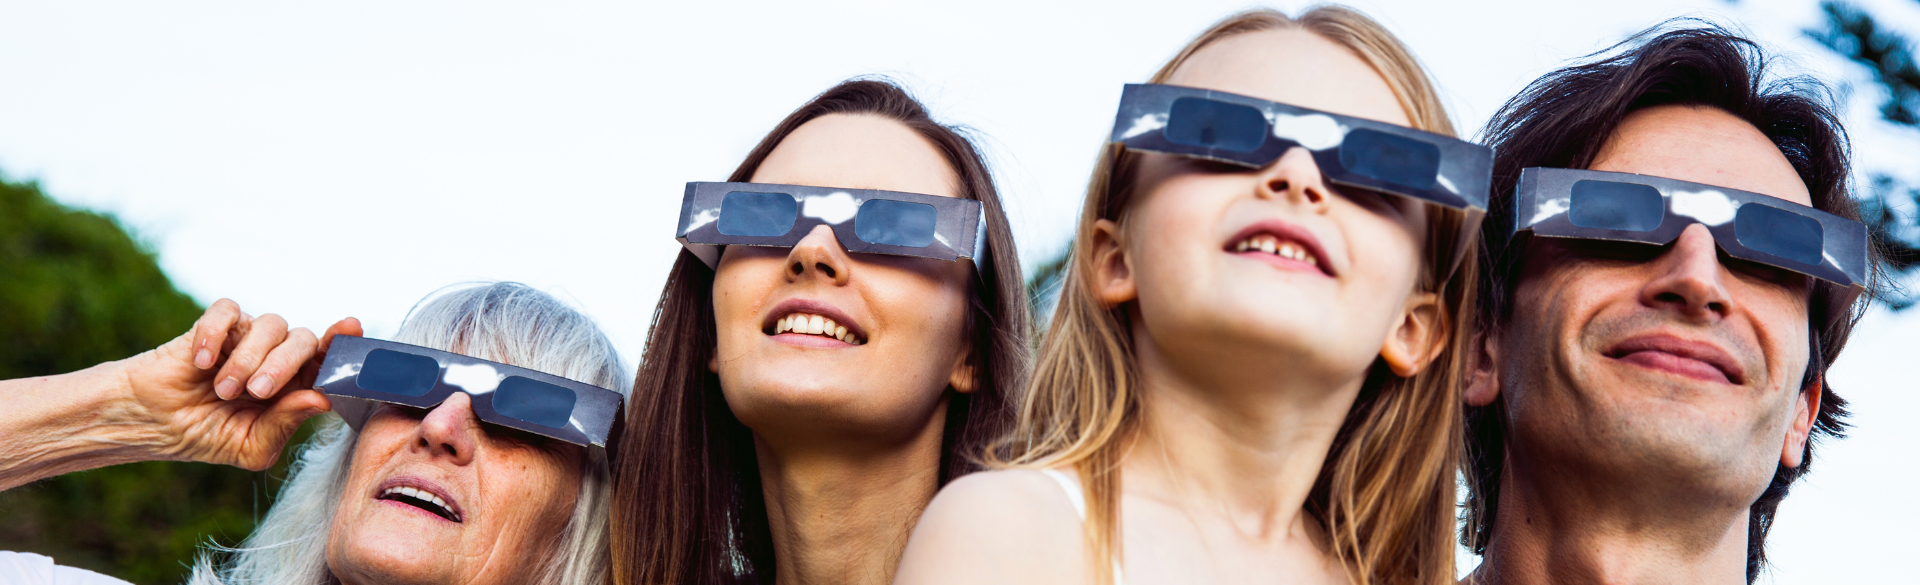 How to Protect Your Vision While Viewing the Solar Eclipse 